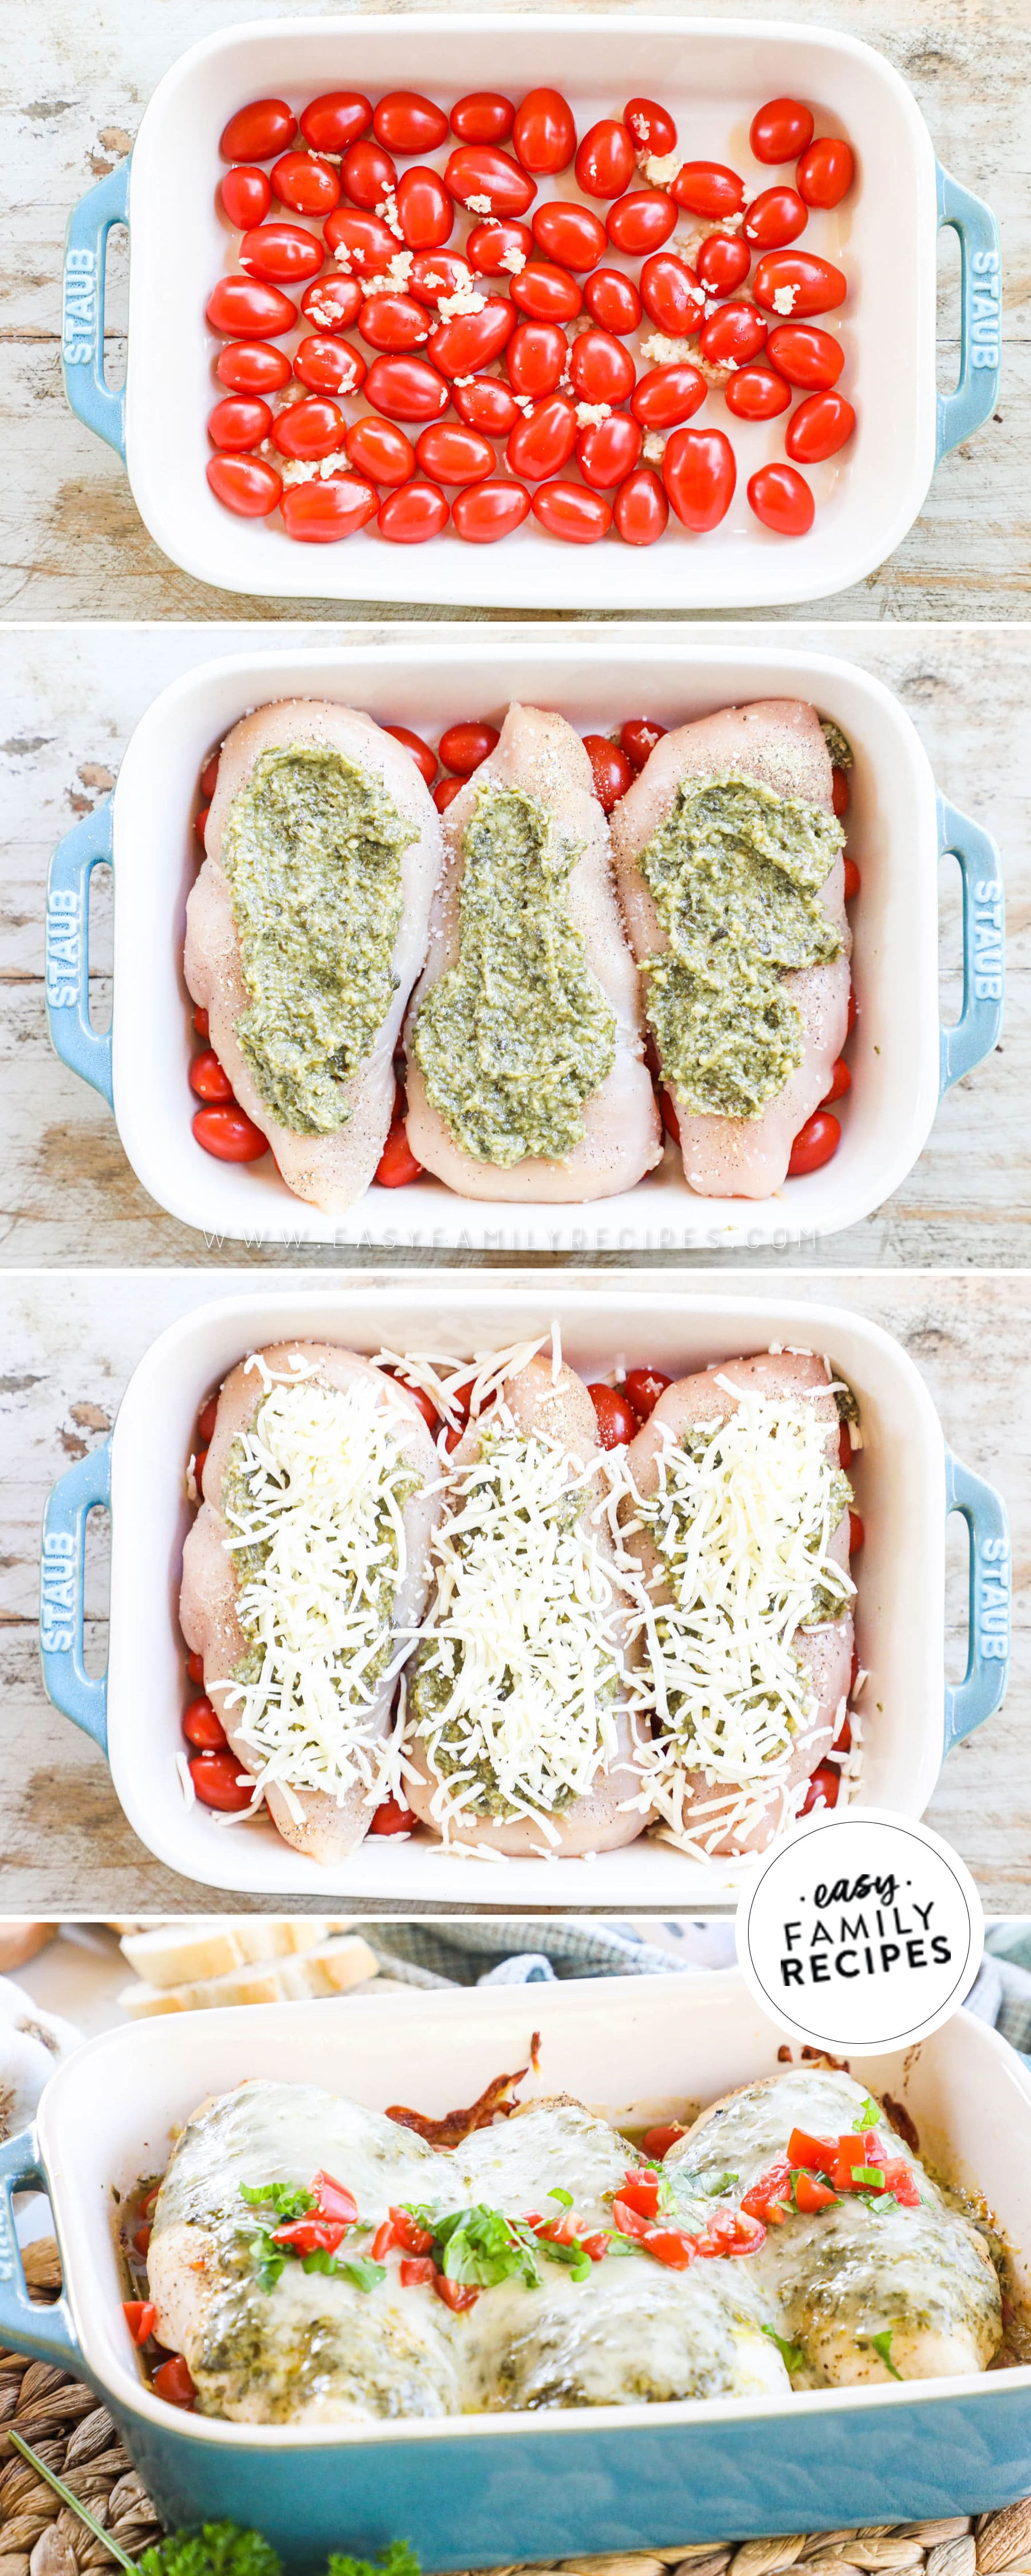 How to make a pesto chicken bake 1)layer the baking dish with cherry tomatoes and garlic 2)arrange pesto covered chicken breasts on top 3)sprinkle mozzarella cheese on top 4)bake until cheese is melted and chicken is juicy